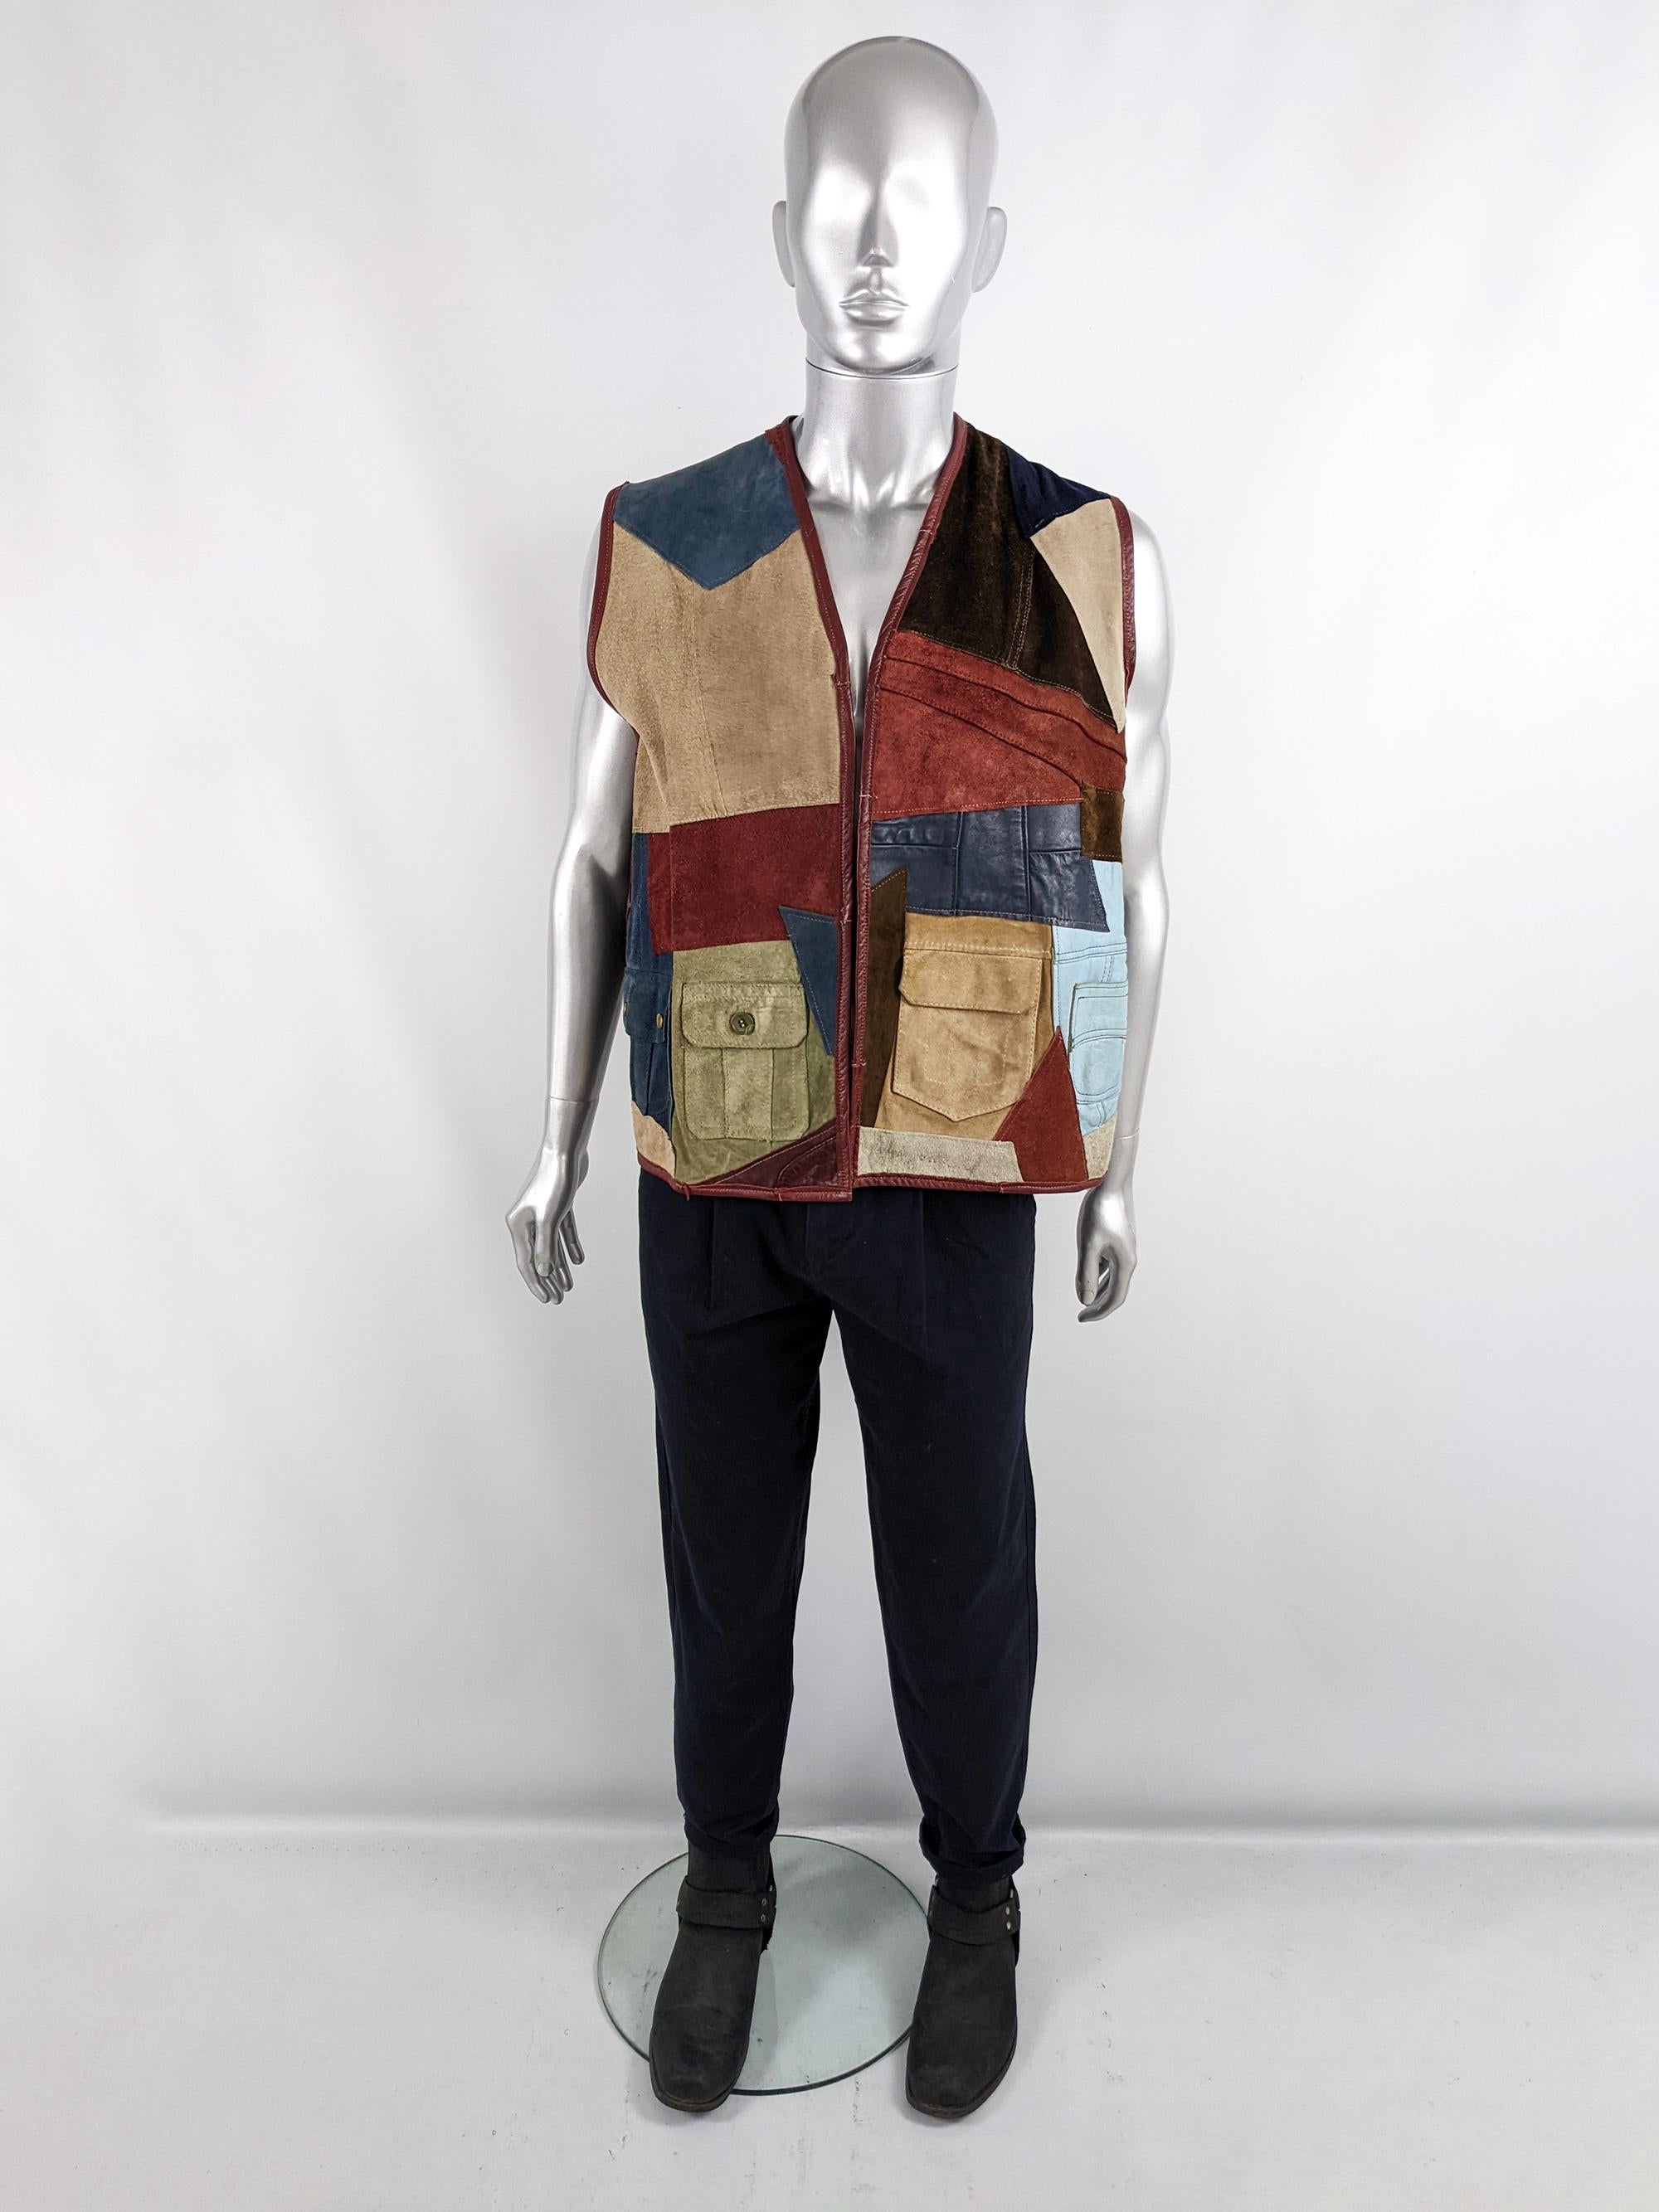 An incredible and rare vintage mens jacket from the 80s by Scrap Scrap. Has been reconstructed in the 1980s from a patchwork of 70s and 80s leather and suede jackets with several pockets.

Size: Unlabelled; best fits a mens Large to XL
Chest - 44” /